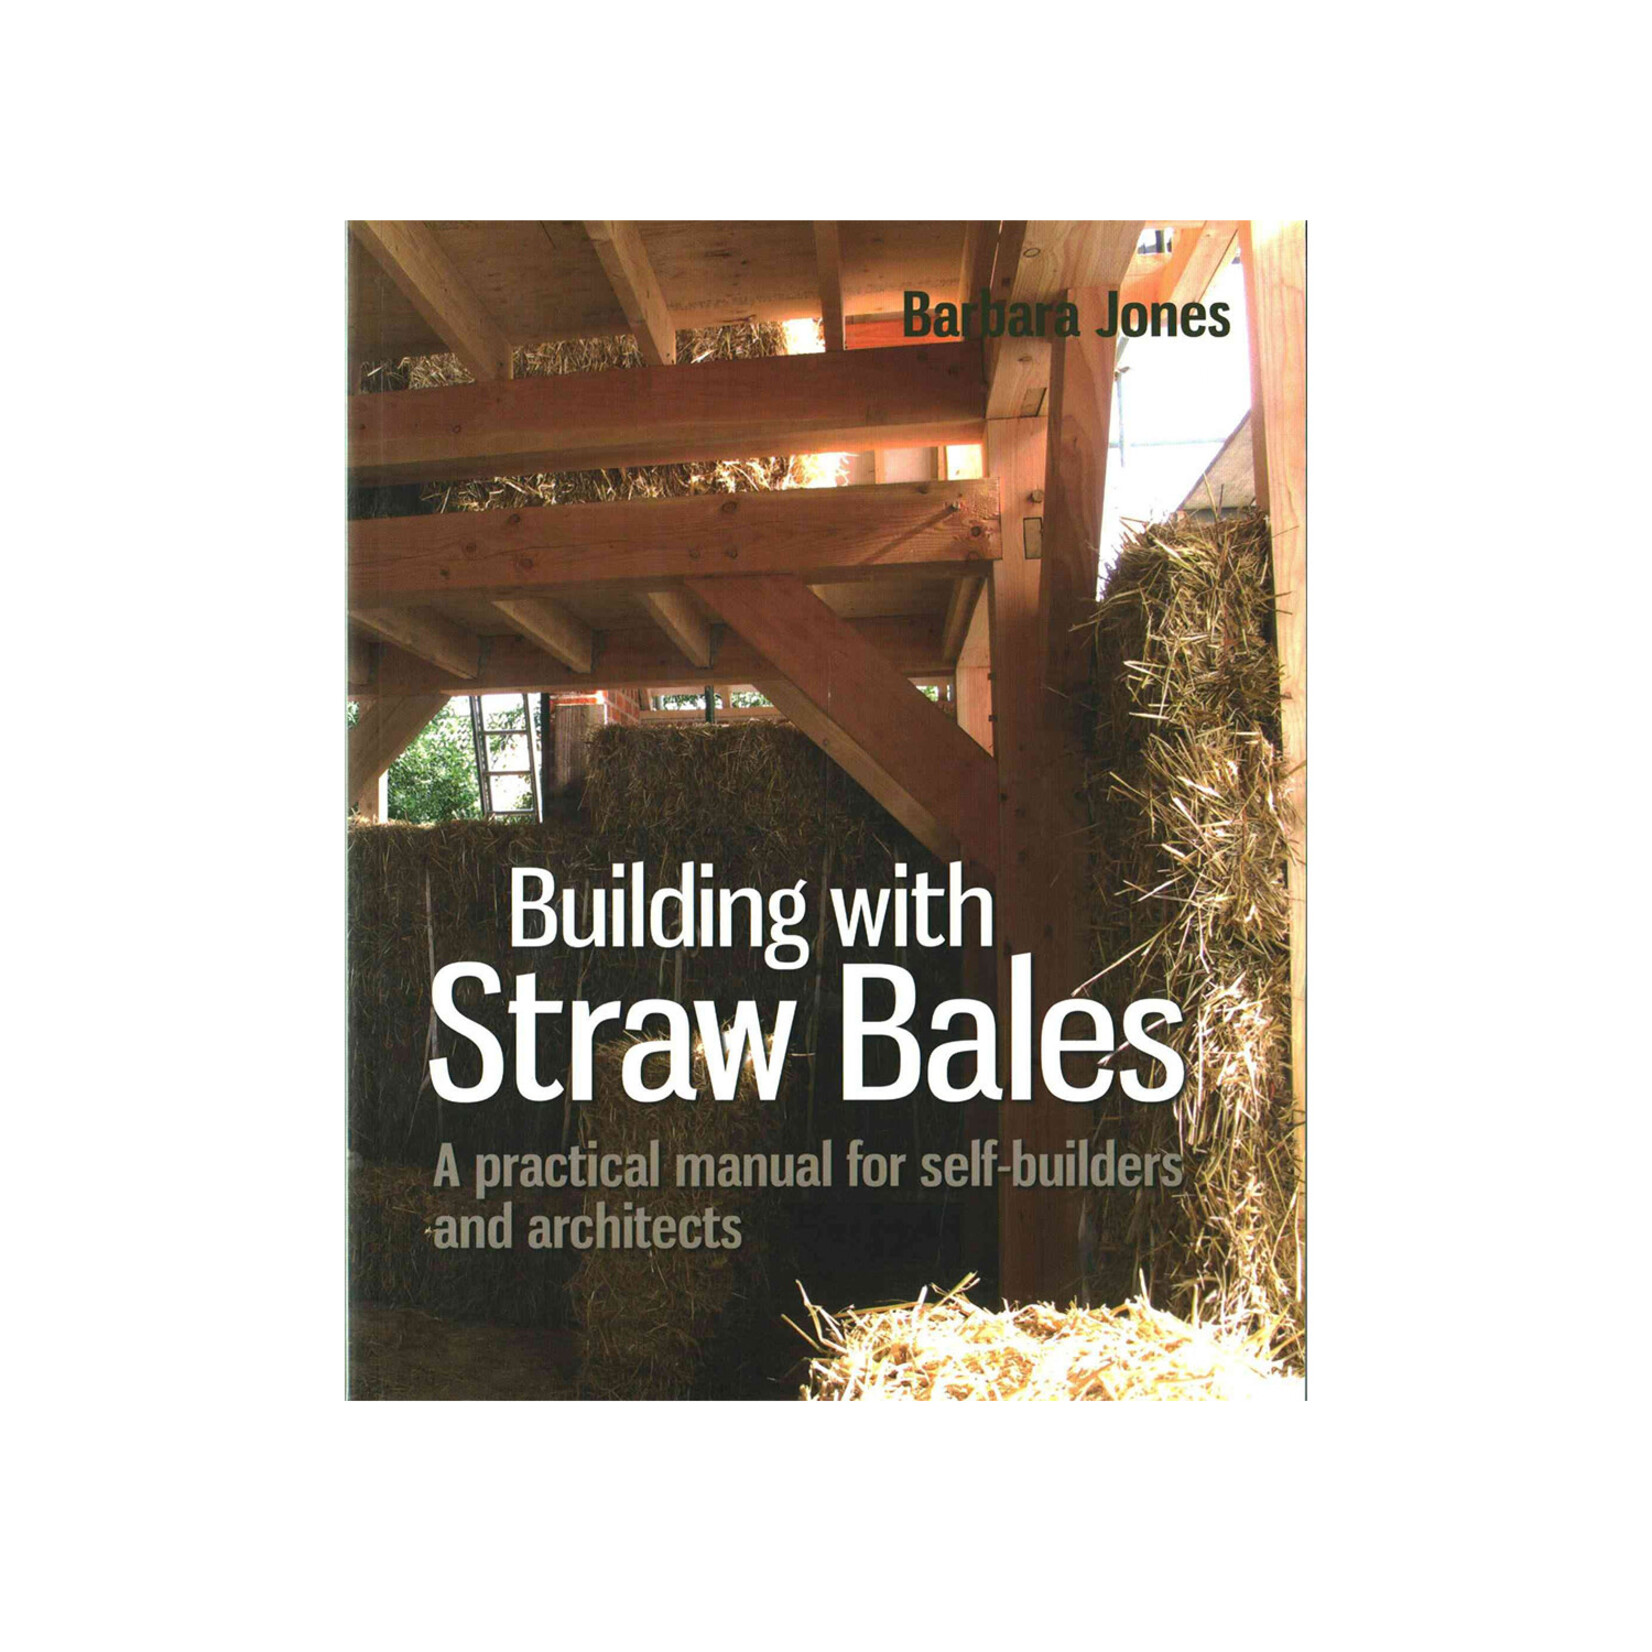 Building with Straw Bales: A Practical Manual for Self-Builders and Architects